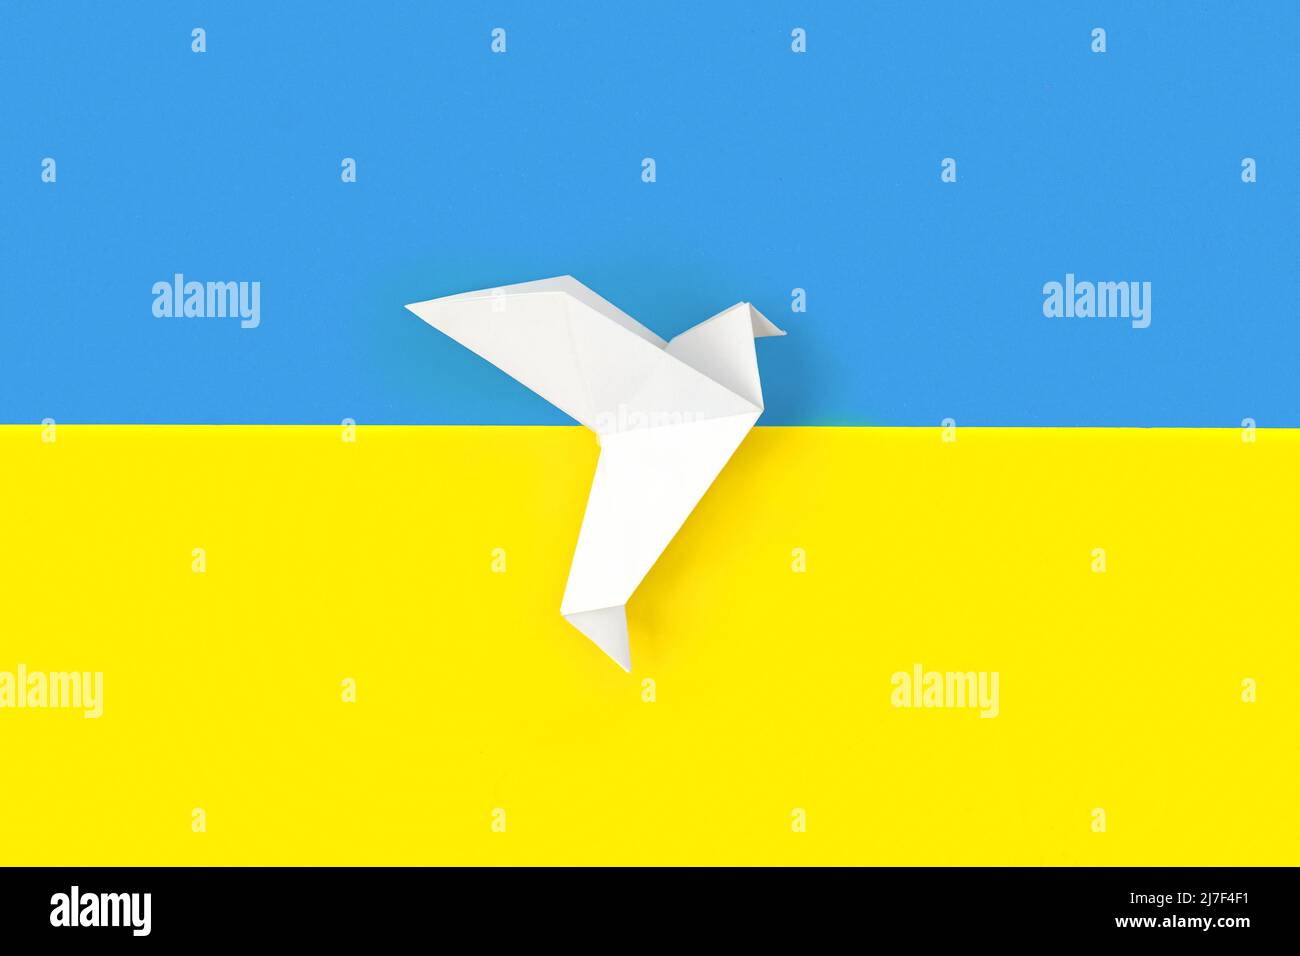 Two white origami paper doves on colors of flag of Ukraine. The concept of peace between two states. Symbol of peace on blue and yellow background. Stock Photo